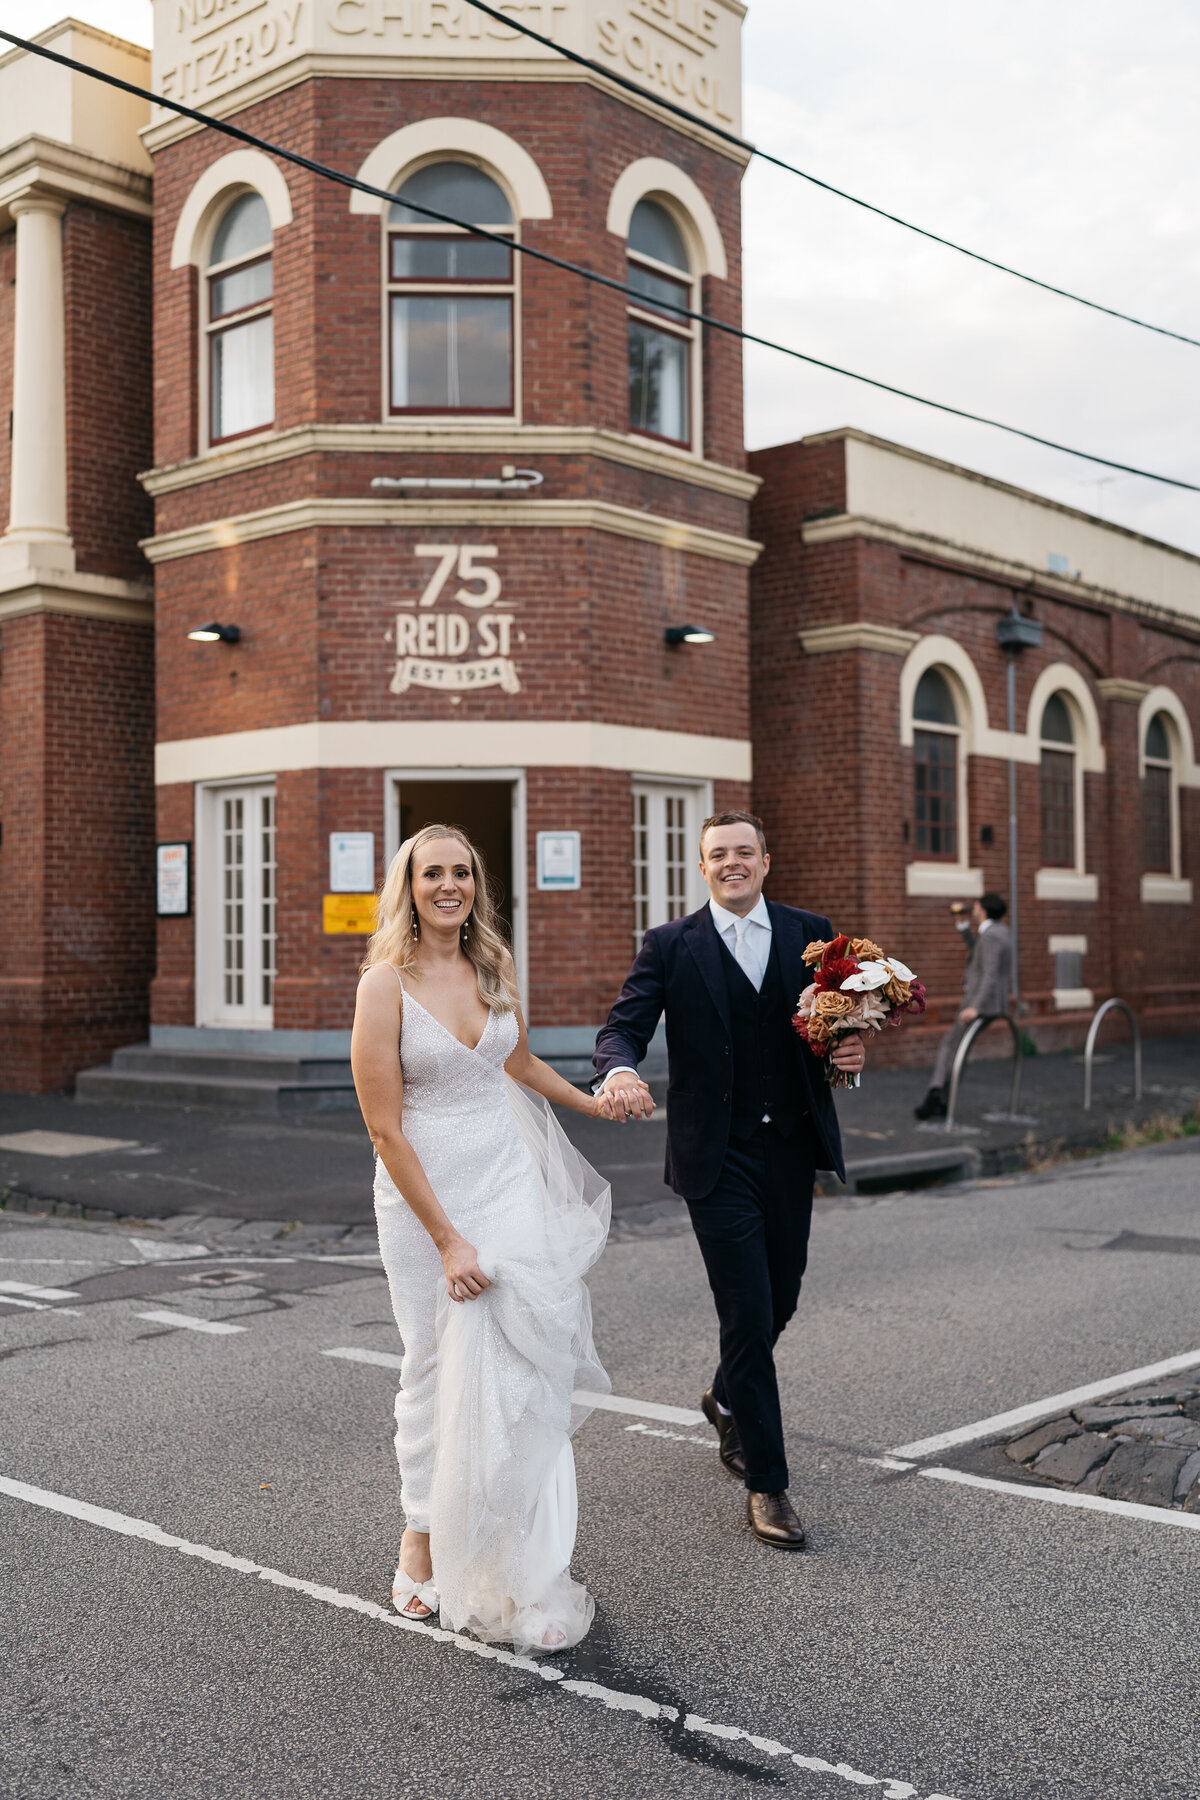 Courtney Laura Photography, Melbourne Wedding Photographer, Fitzroy Nth, 75 Reid St, Cath and Mitch-677